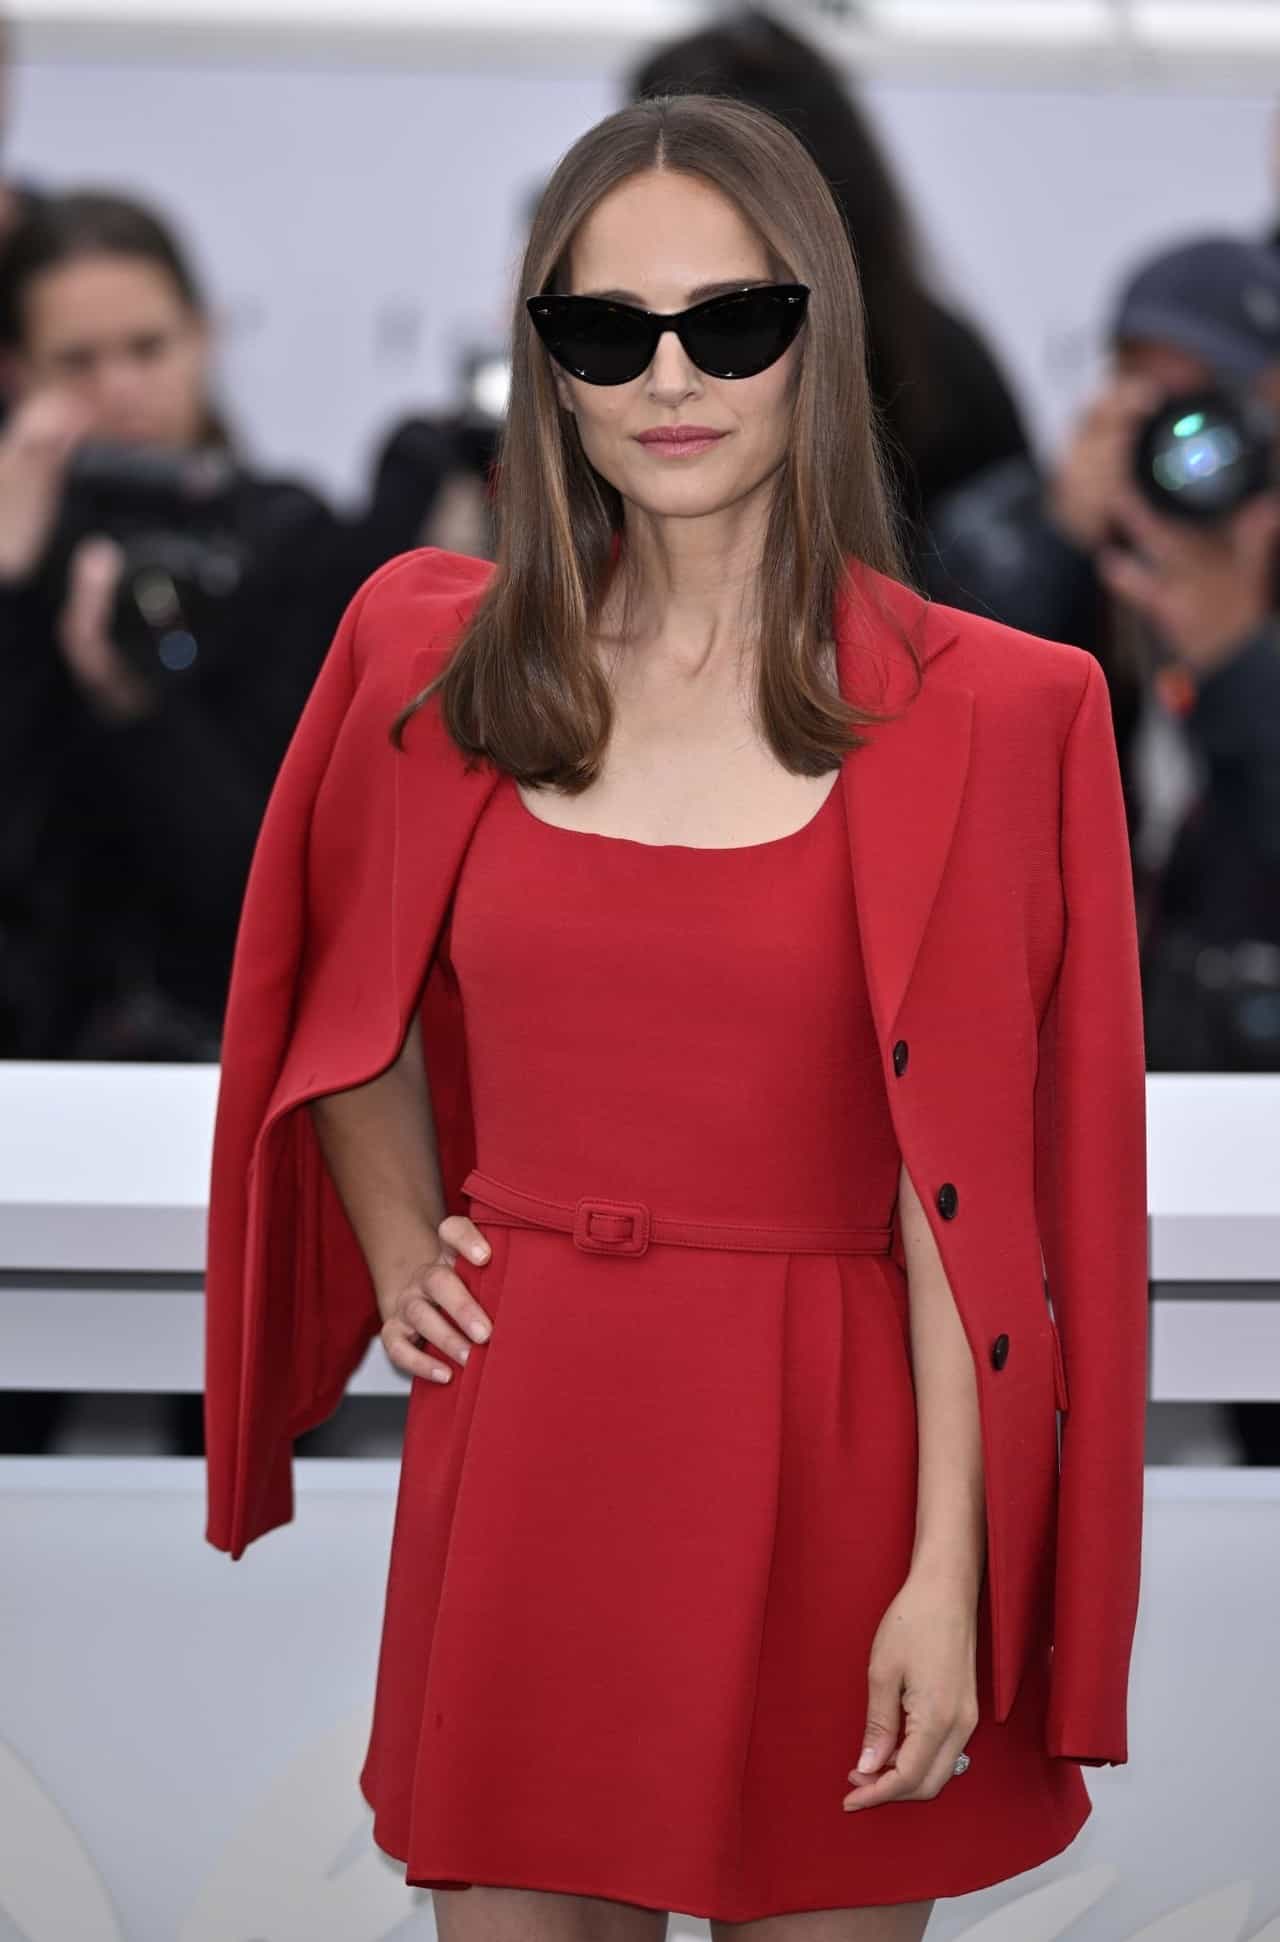 Natalie Portman in a Vibrant Red Dior Outfit at the Cannes Film Festival